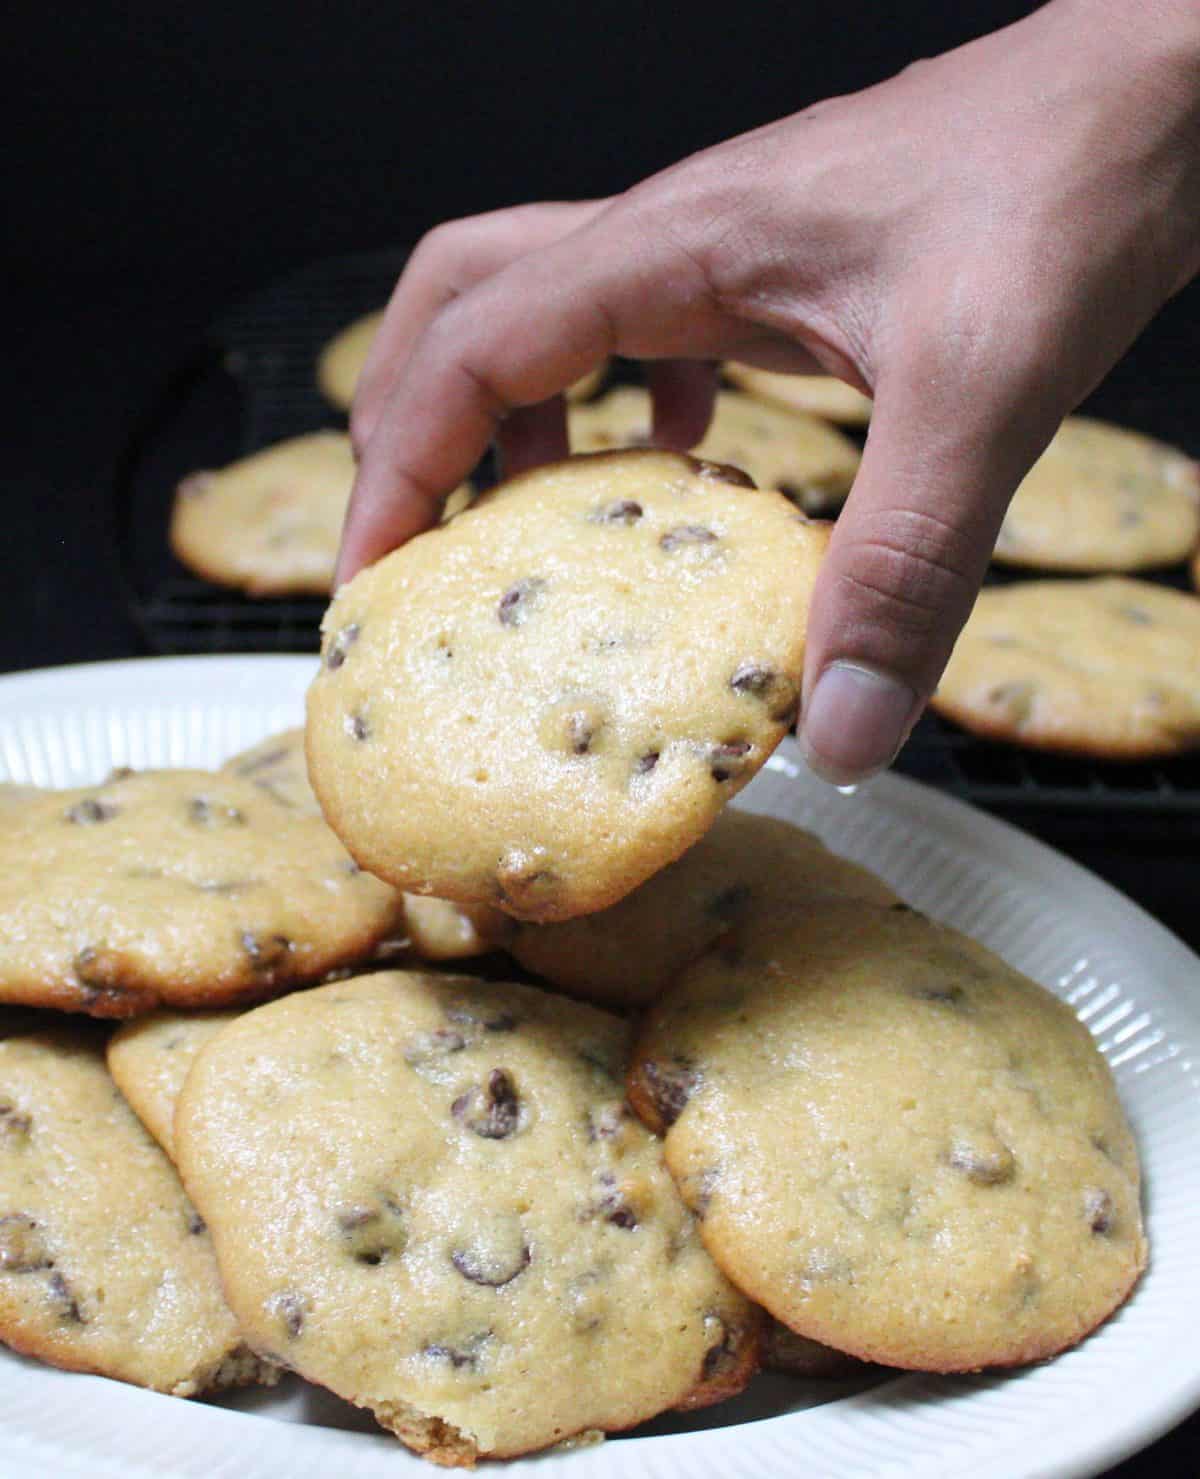 Jay's hand taking a chocolate chip sourdough cookie from a plate.